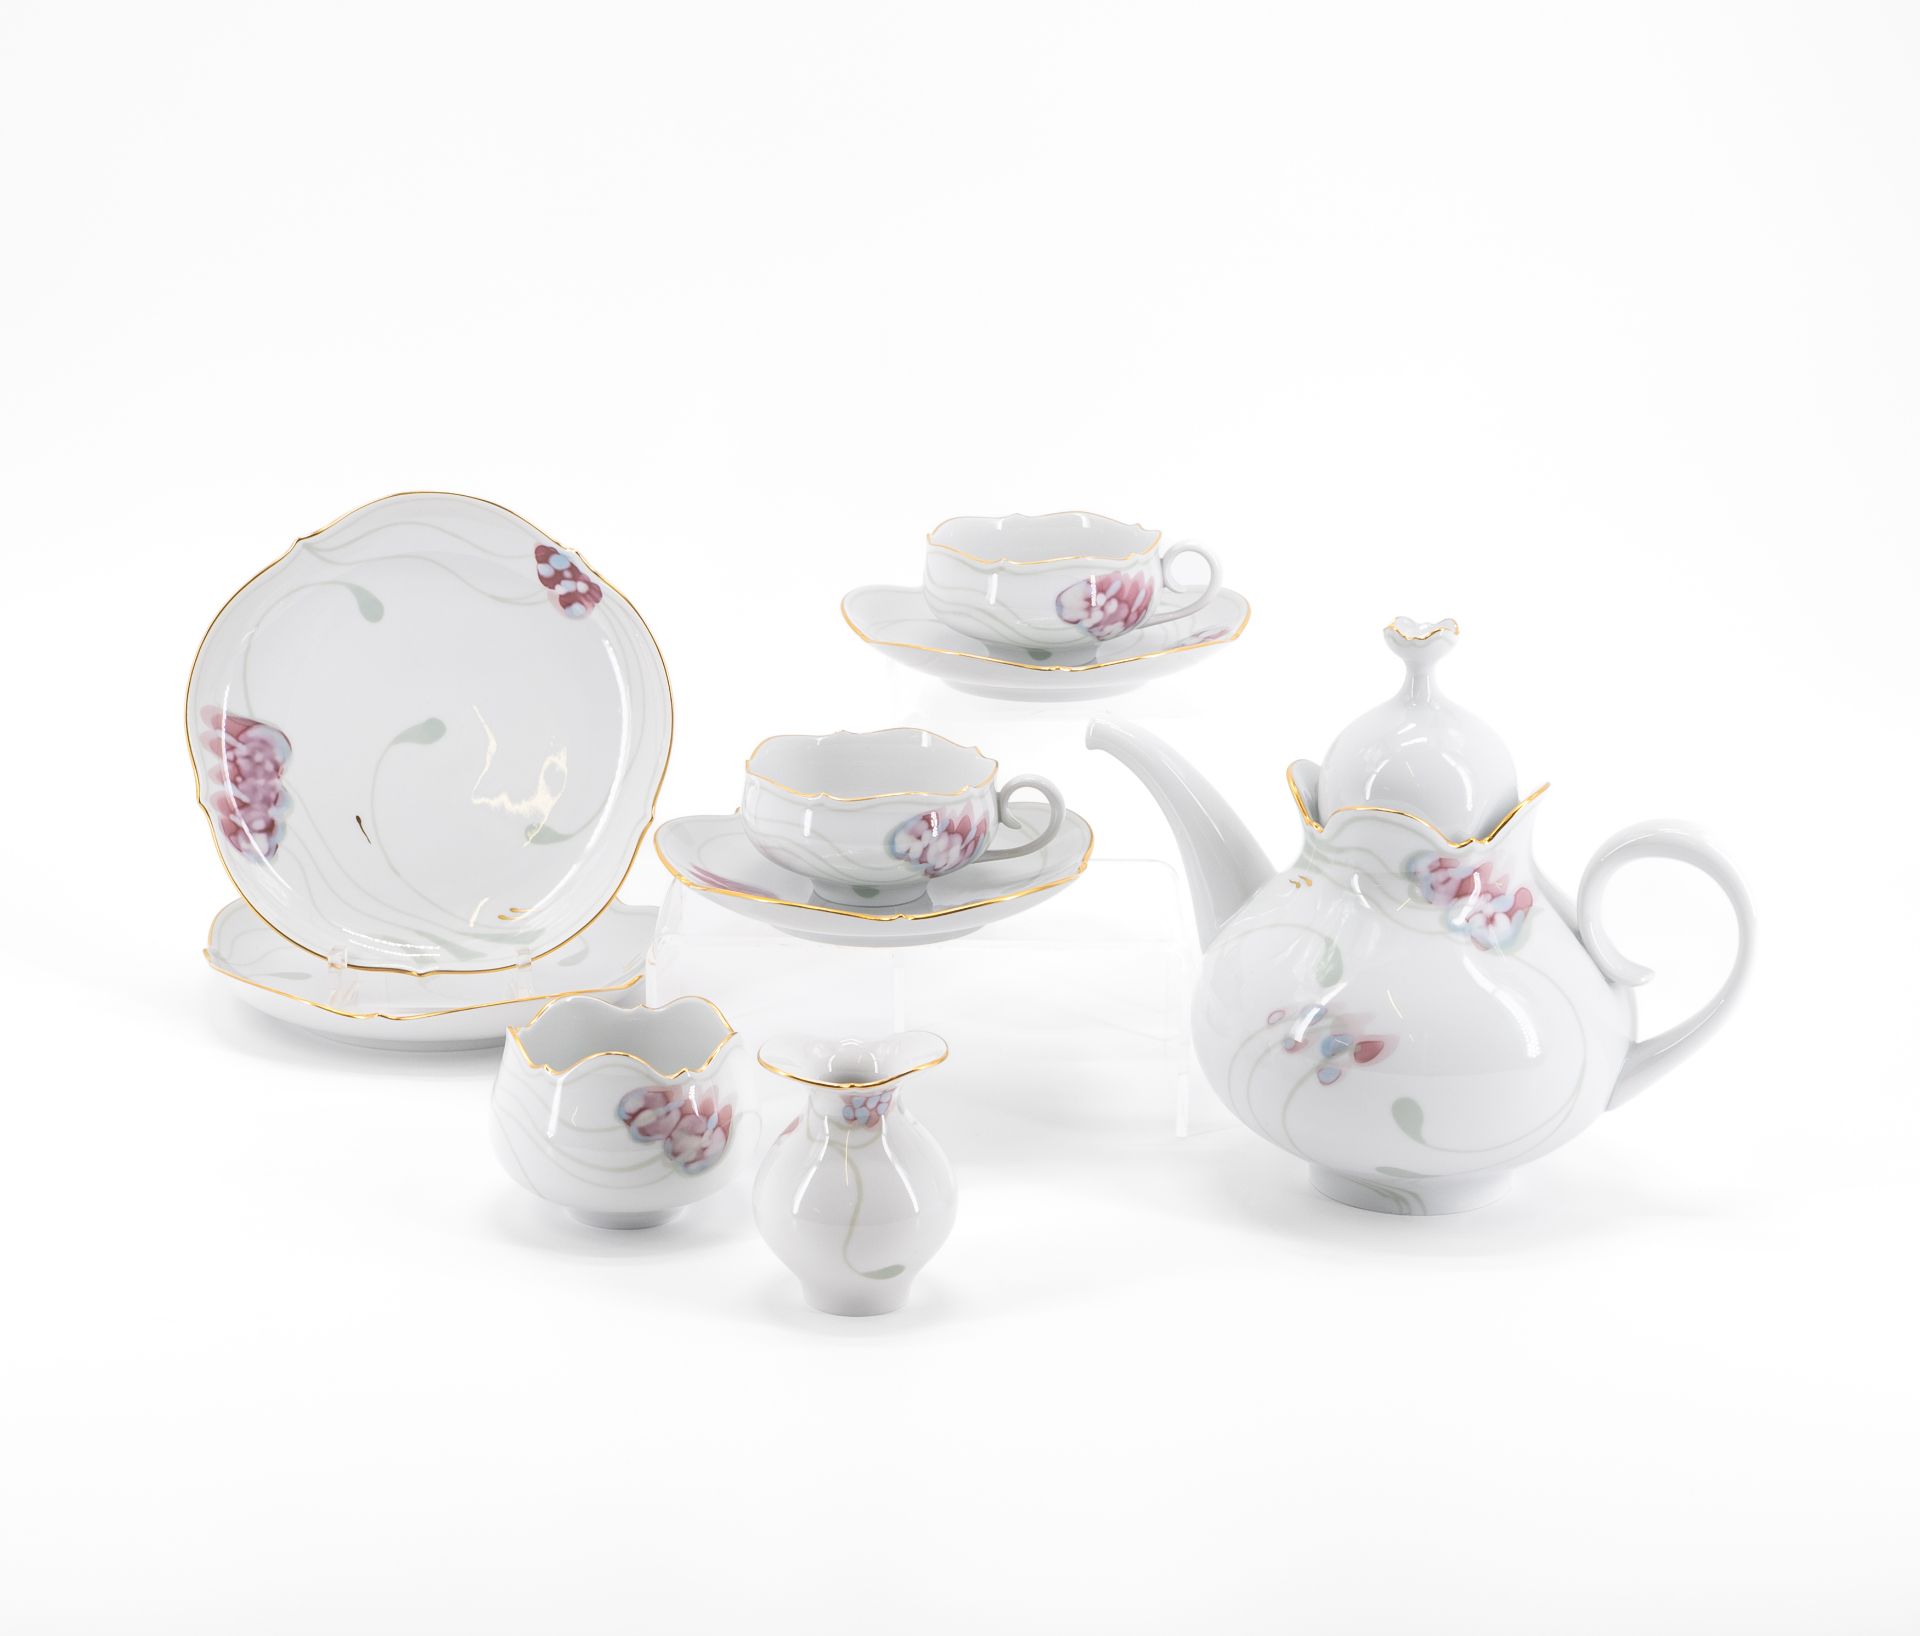 PORCELAIN TEA SERVICE FOR SIX IN THE 'LARGE CUT-OUT' SHAPE WITH 'WINDFLOWER' DECORATION